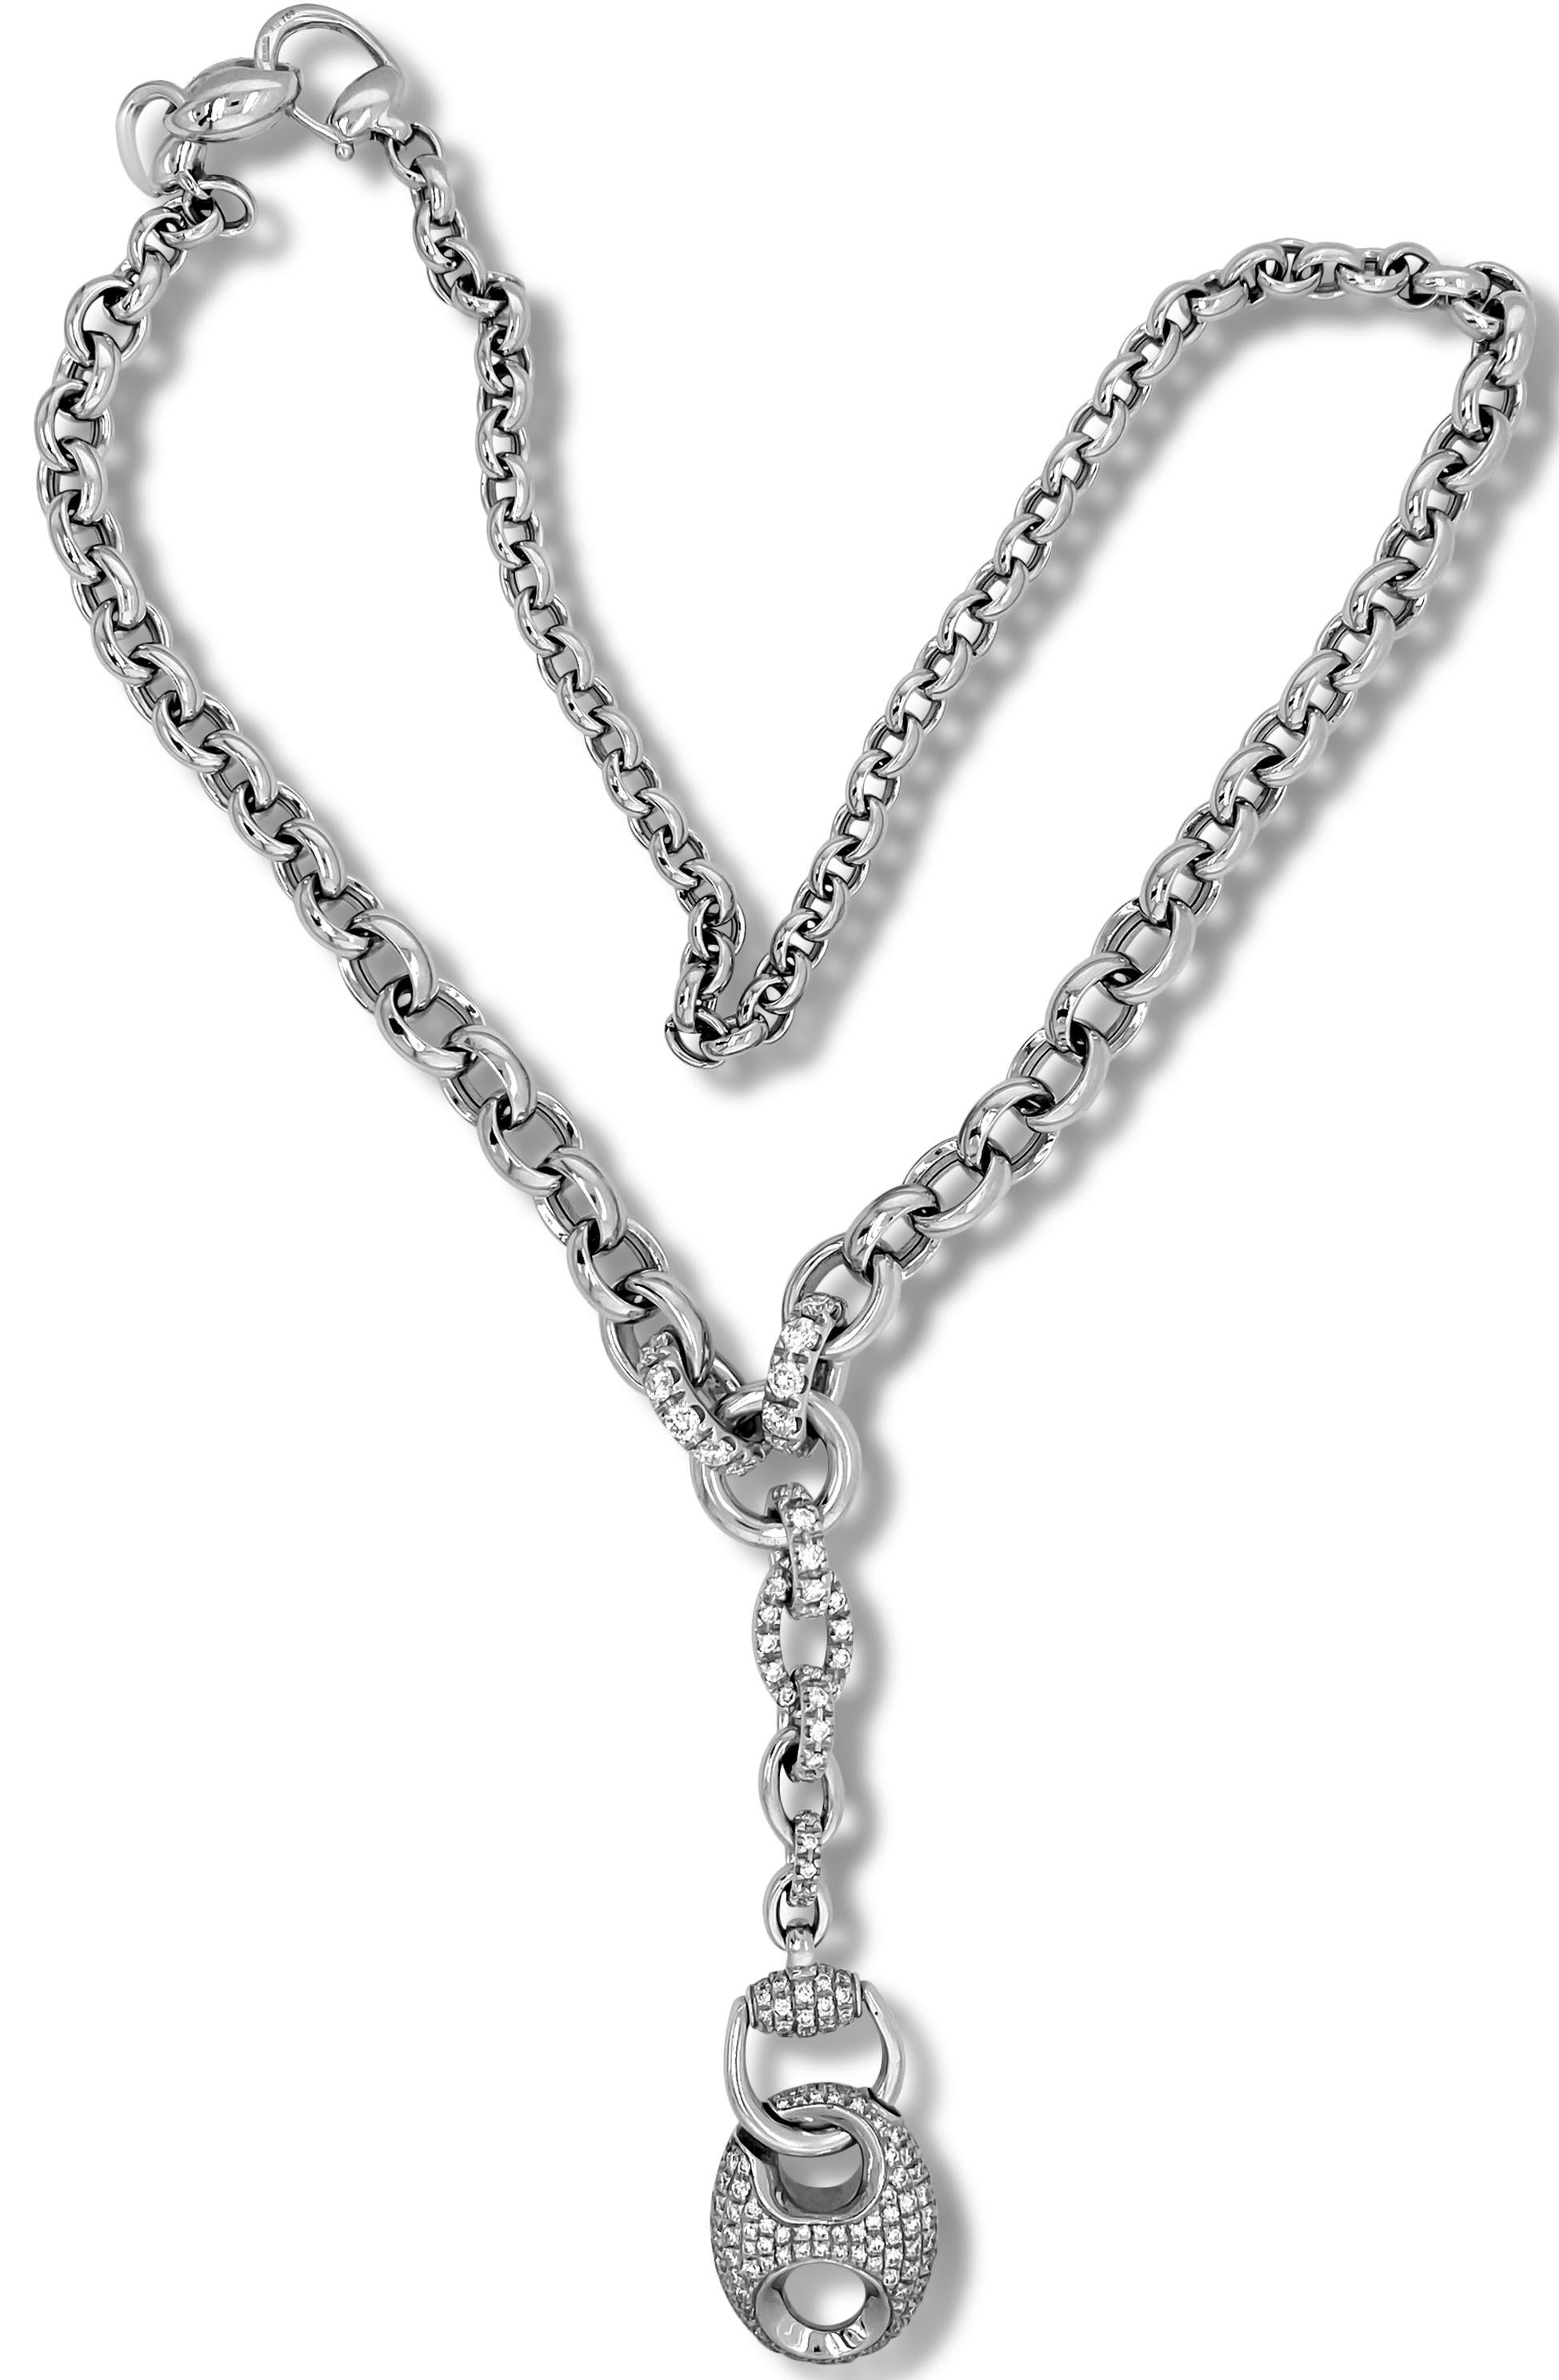 Gucci 18K White Gold Diamond Oval Link Long Chain Drop Pendant Necklace

Orignial GUCCI. Signature is on the clasp.

2.75 carat diamonds total weight

18 inch neck length. 3 inch drop.